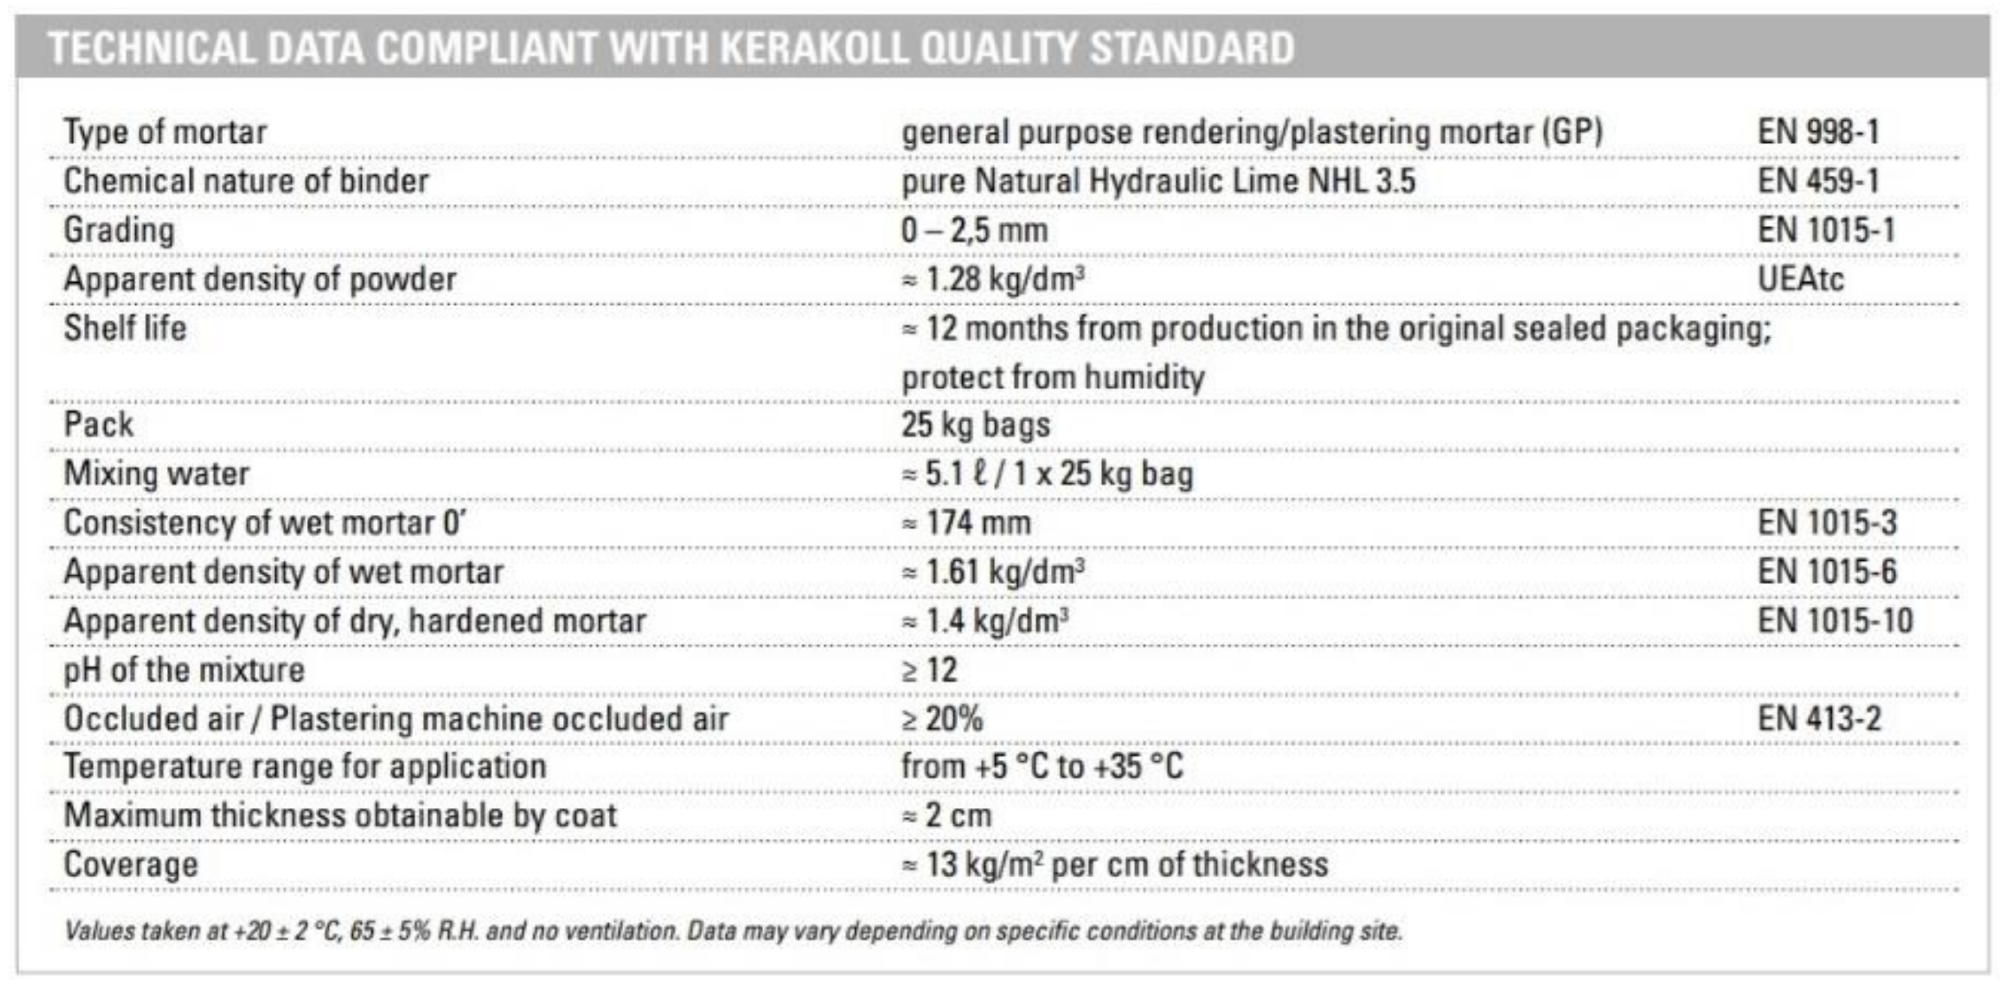 Characteristics of the BIOCALCE® product manufactured by the Kerakoll company.